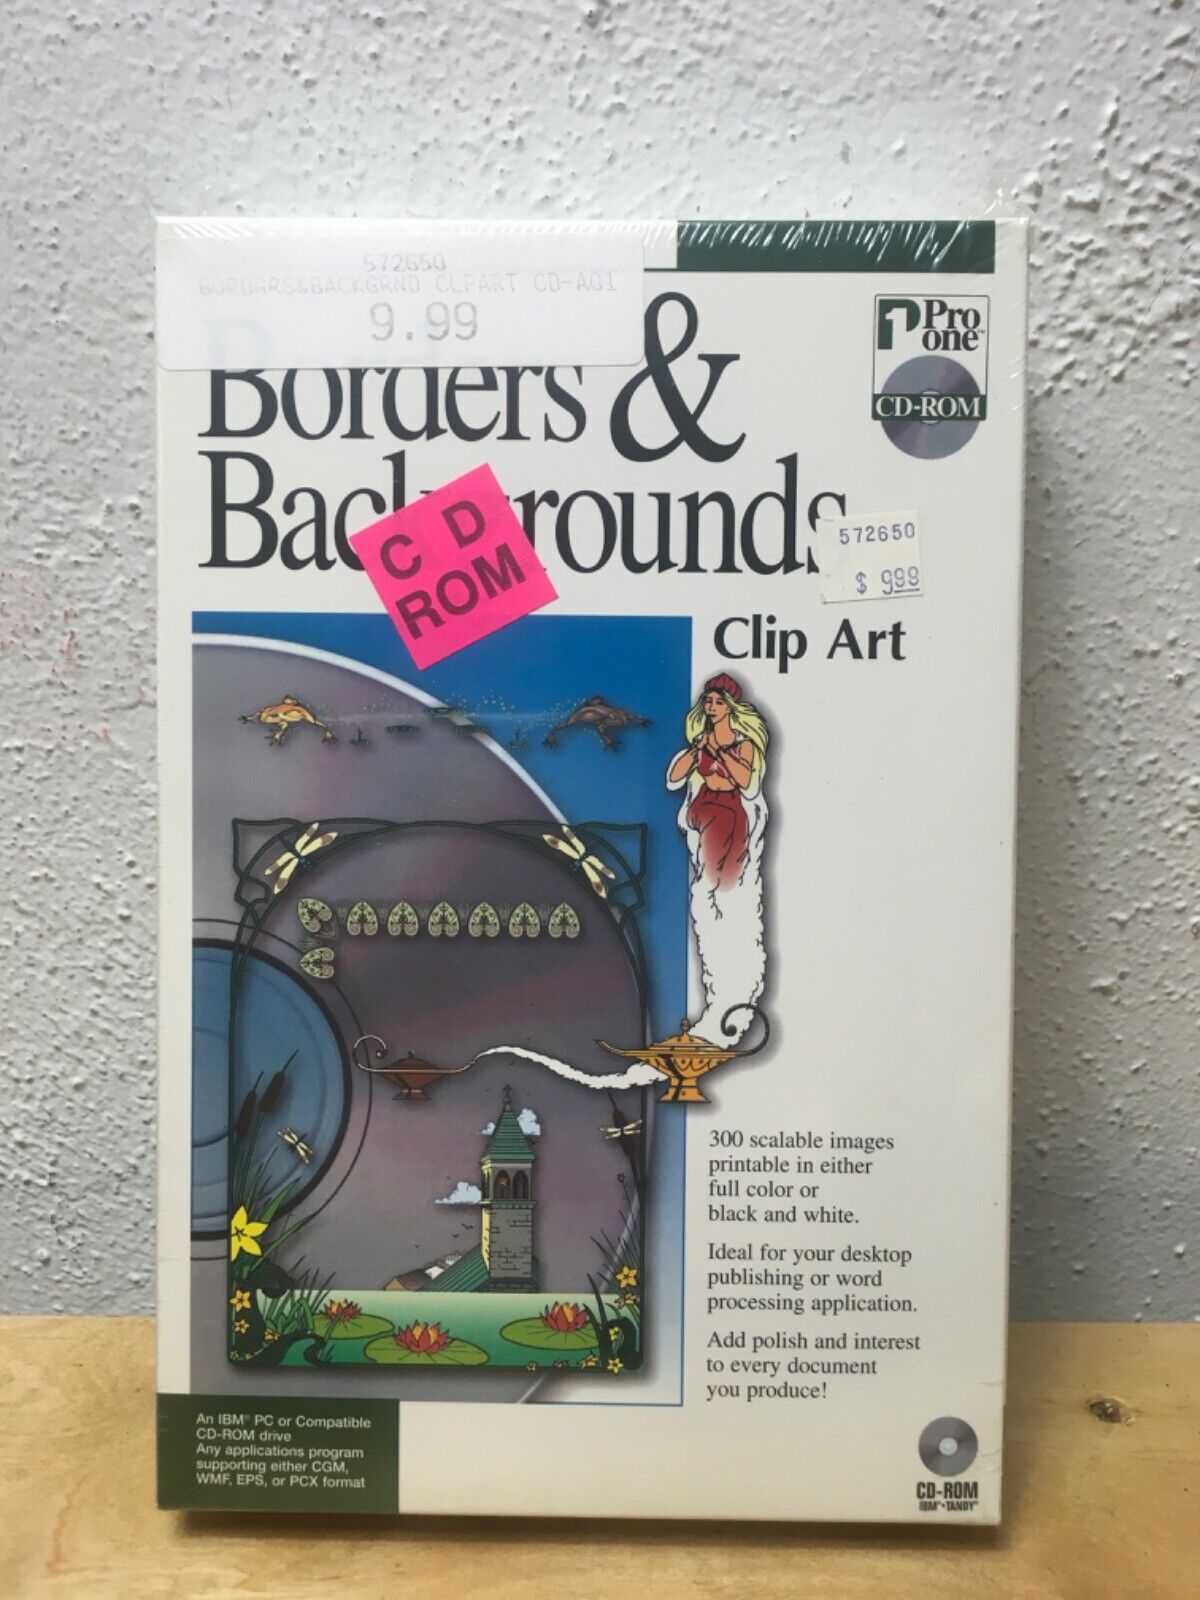 Pro One Borders & Backgrounds Clip Art CD-ROM Vintage Software NEW Sealed#b-15